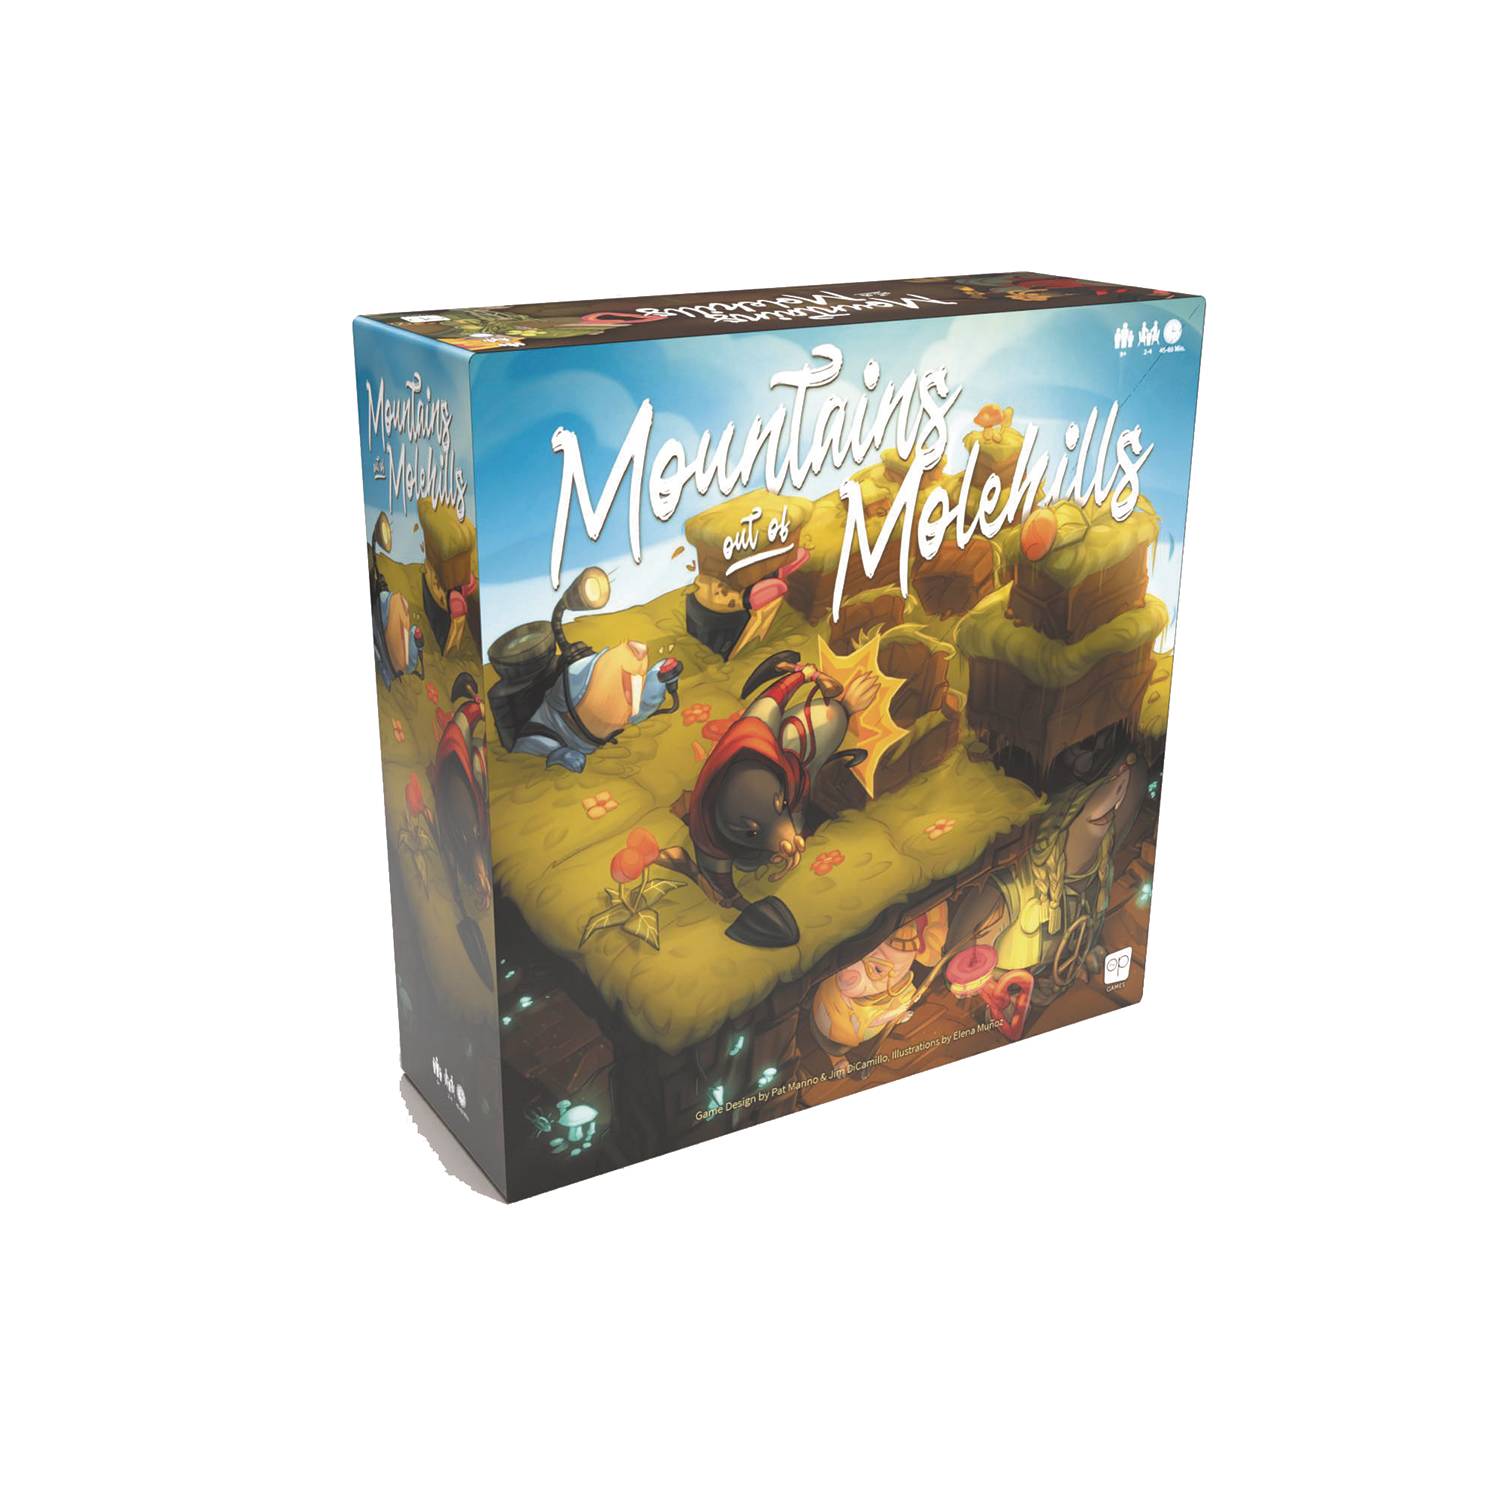 MOUNTAINS OUT OF MOLE HILLS BOARD GAME